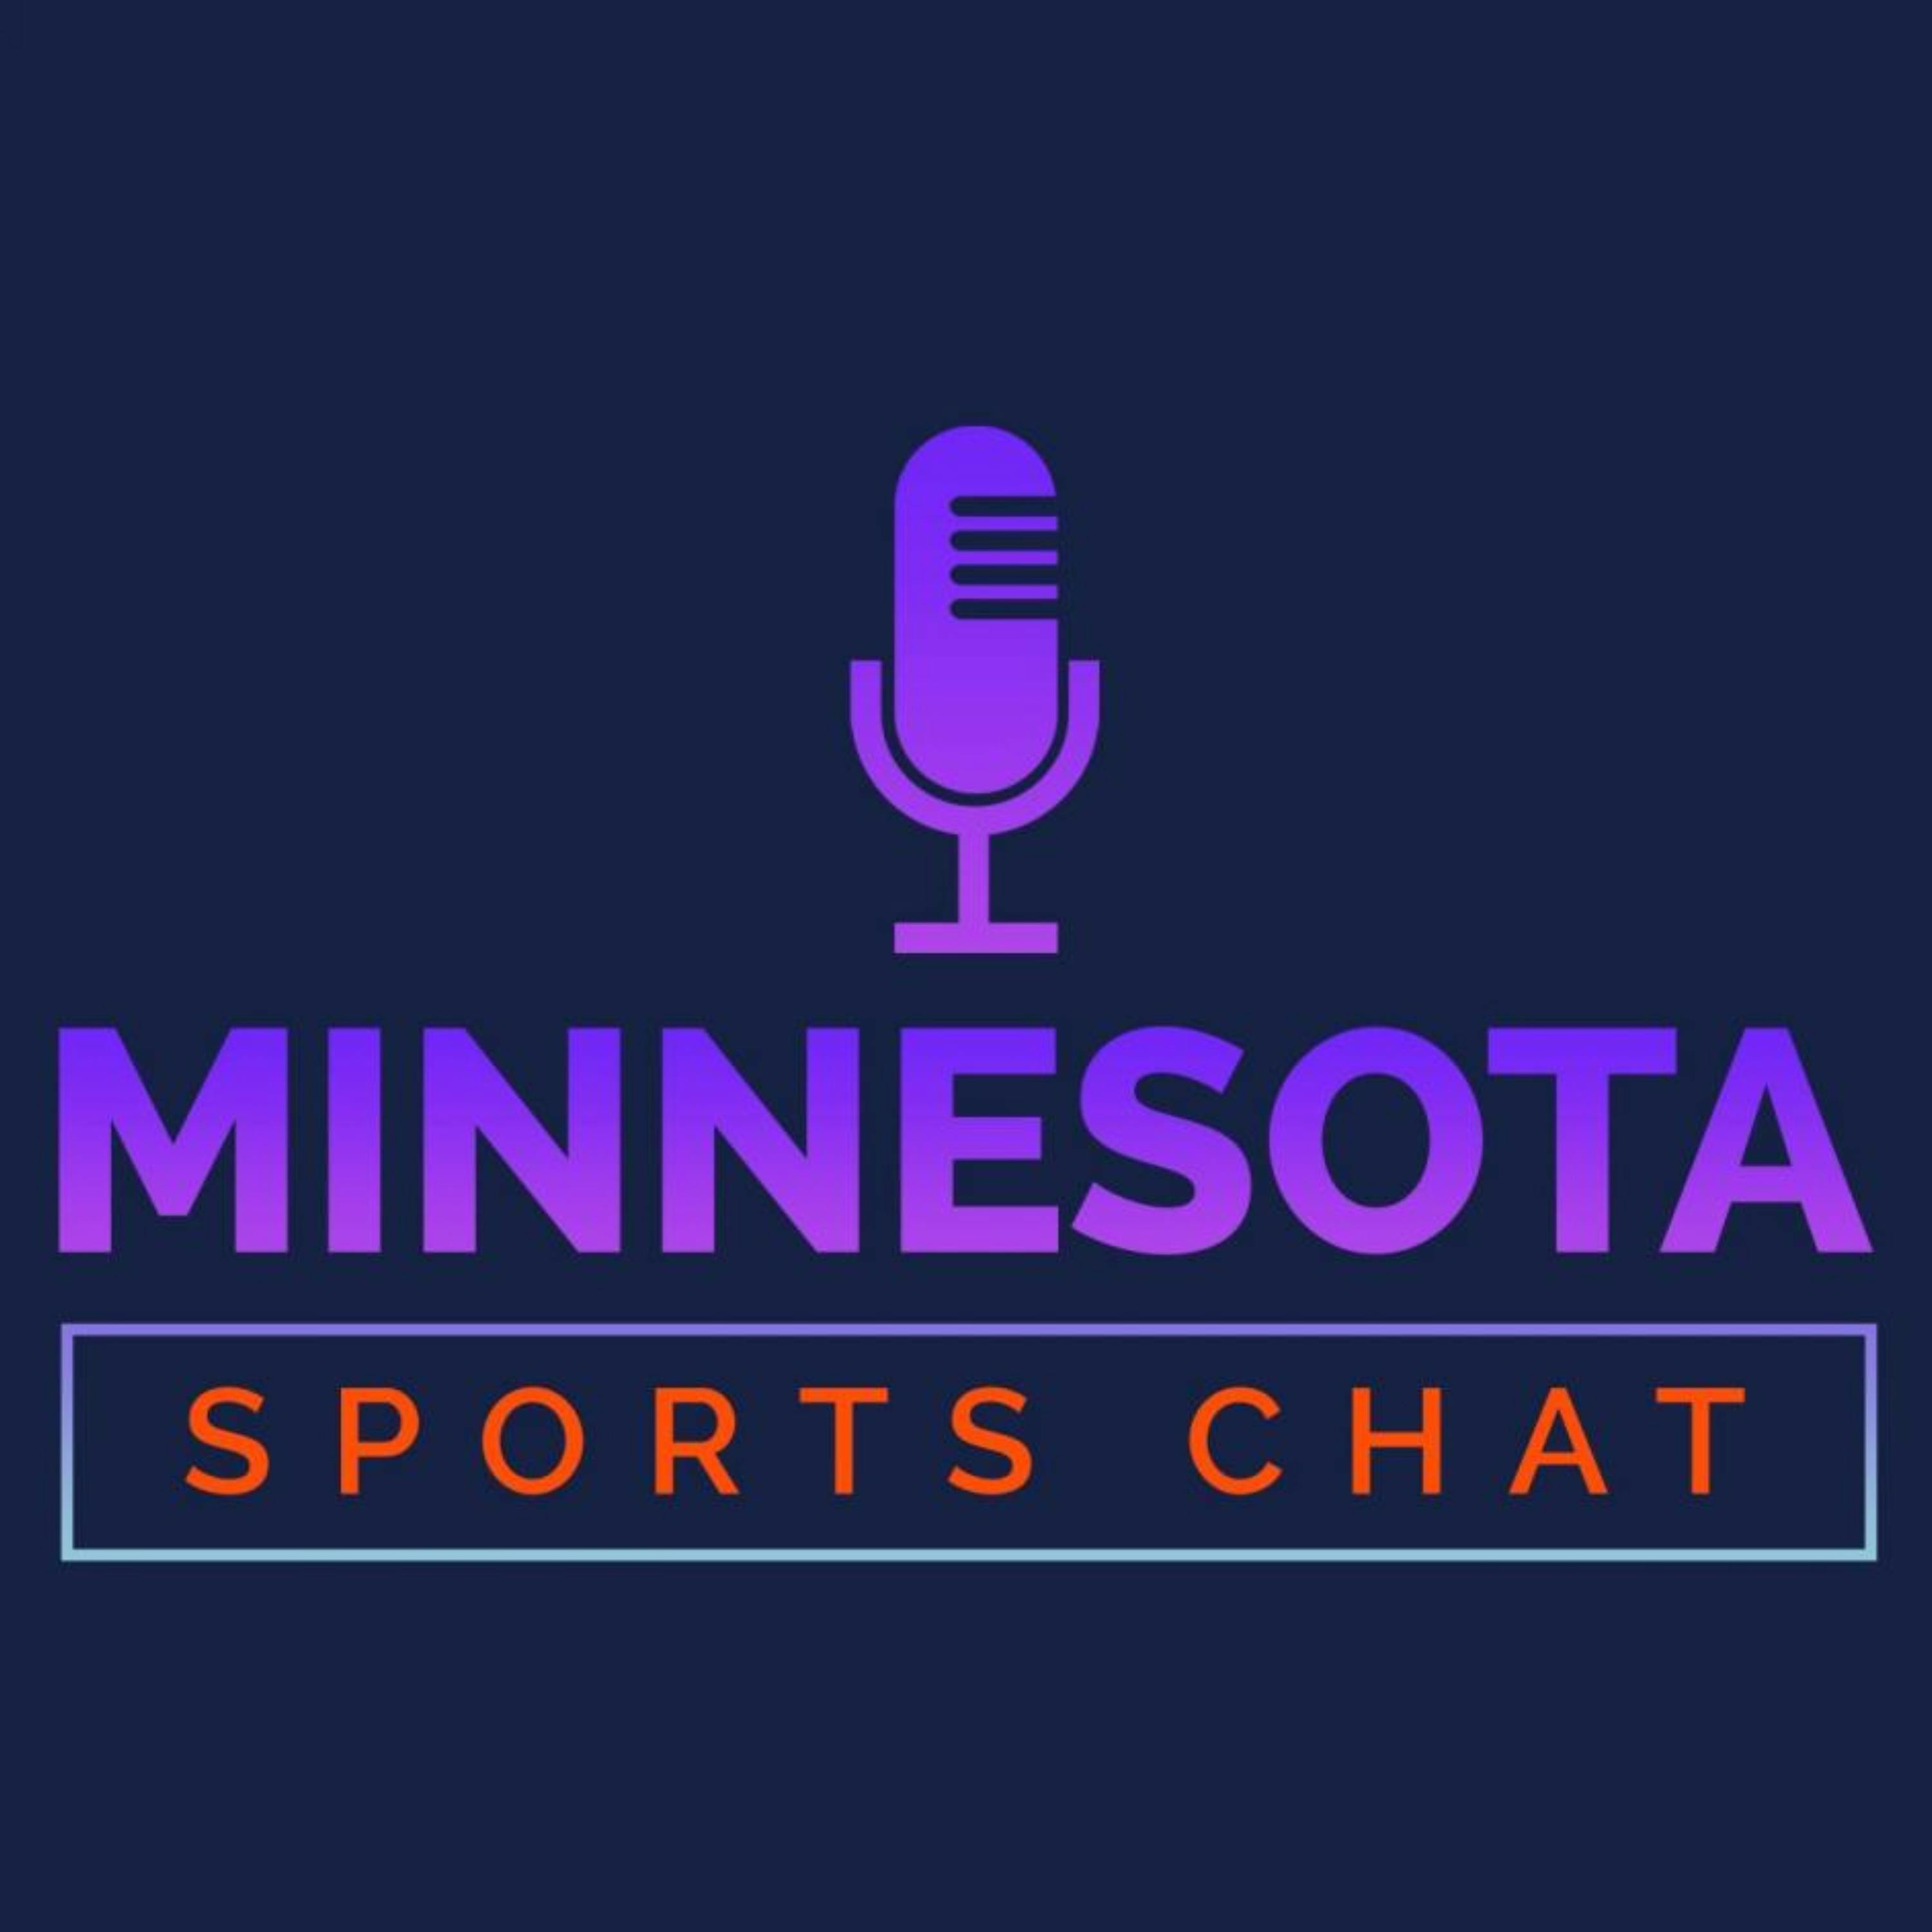 “Wild” Kirk Cousins SPECULATION with Jessi Pierce from the Bardown Beauties podcast